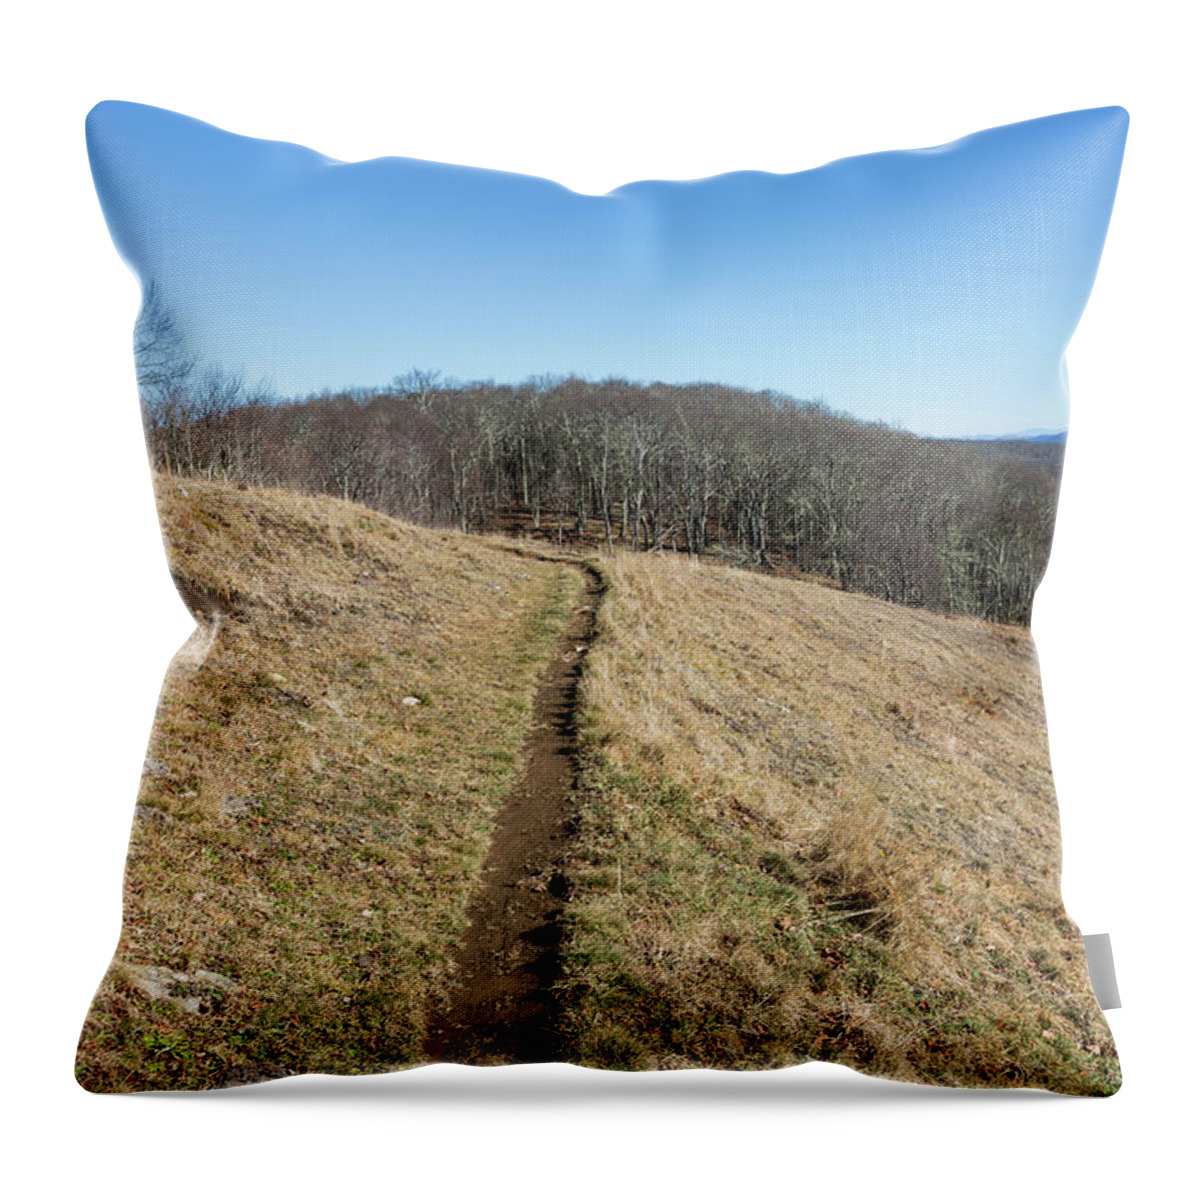 Empty Throw Pillow featuring the photograph Winter Trail - December 7, 2016 by D K Wall